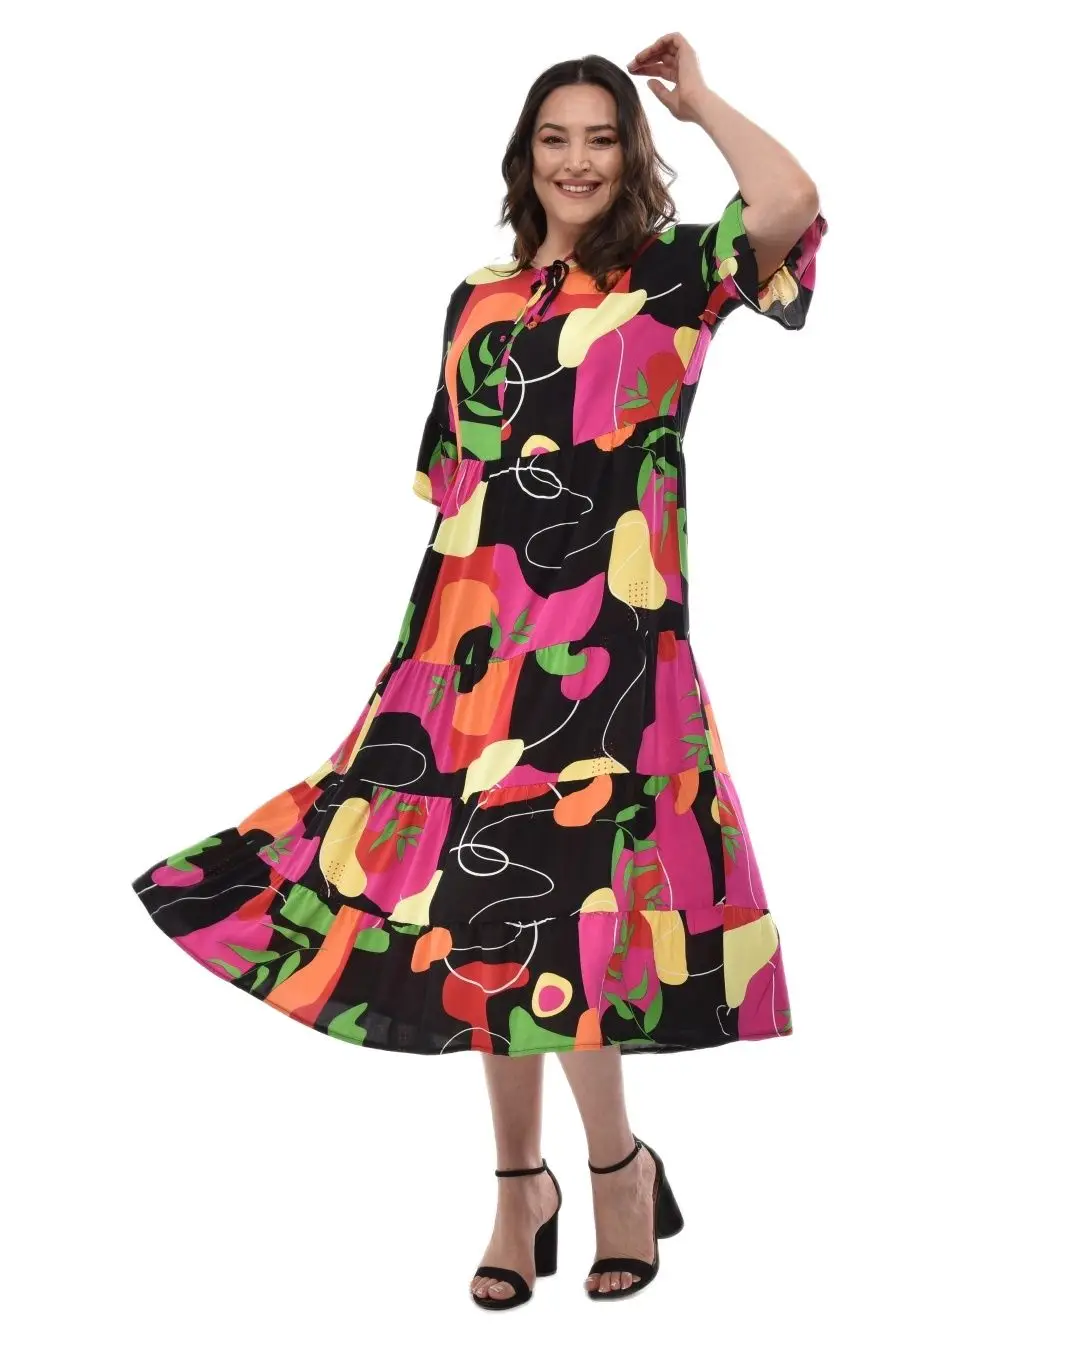 Women’s Plus Size Dress Colorful Print And Collor Detail, Designed and Made in Turkey, New Arrival